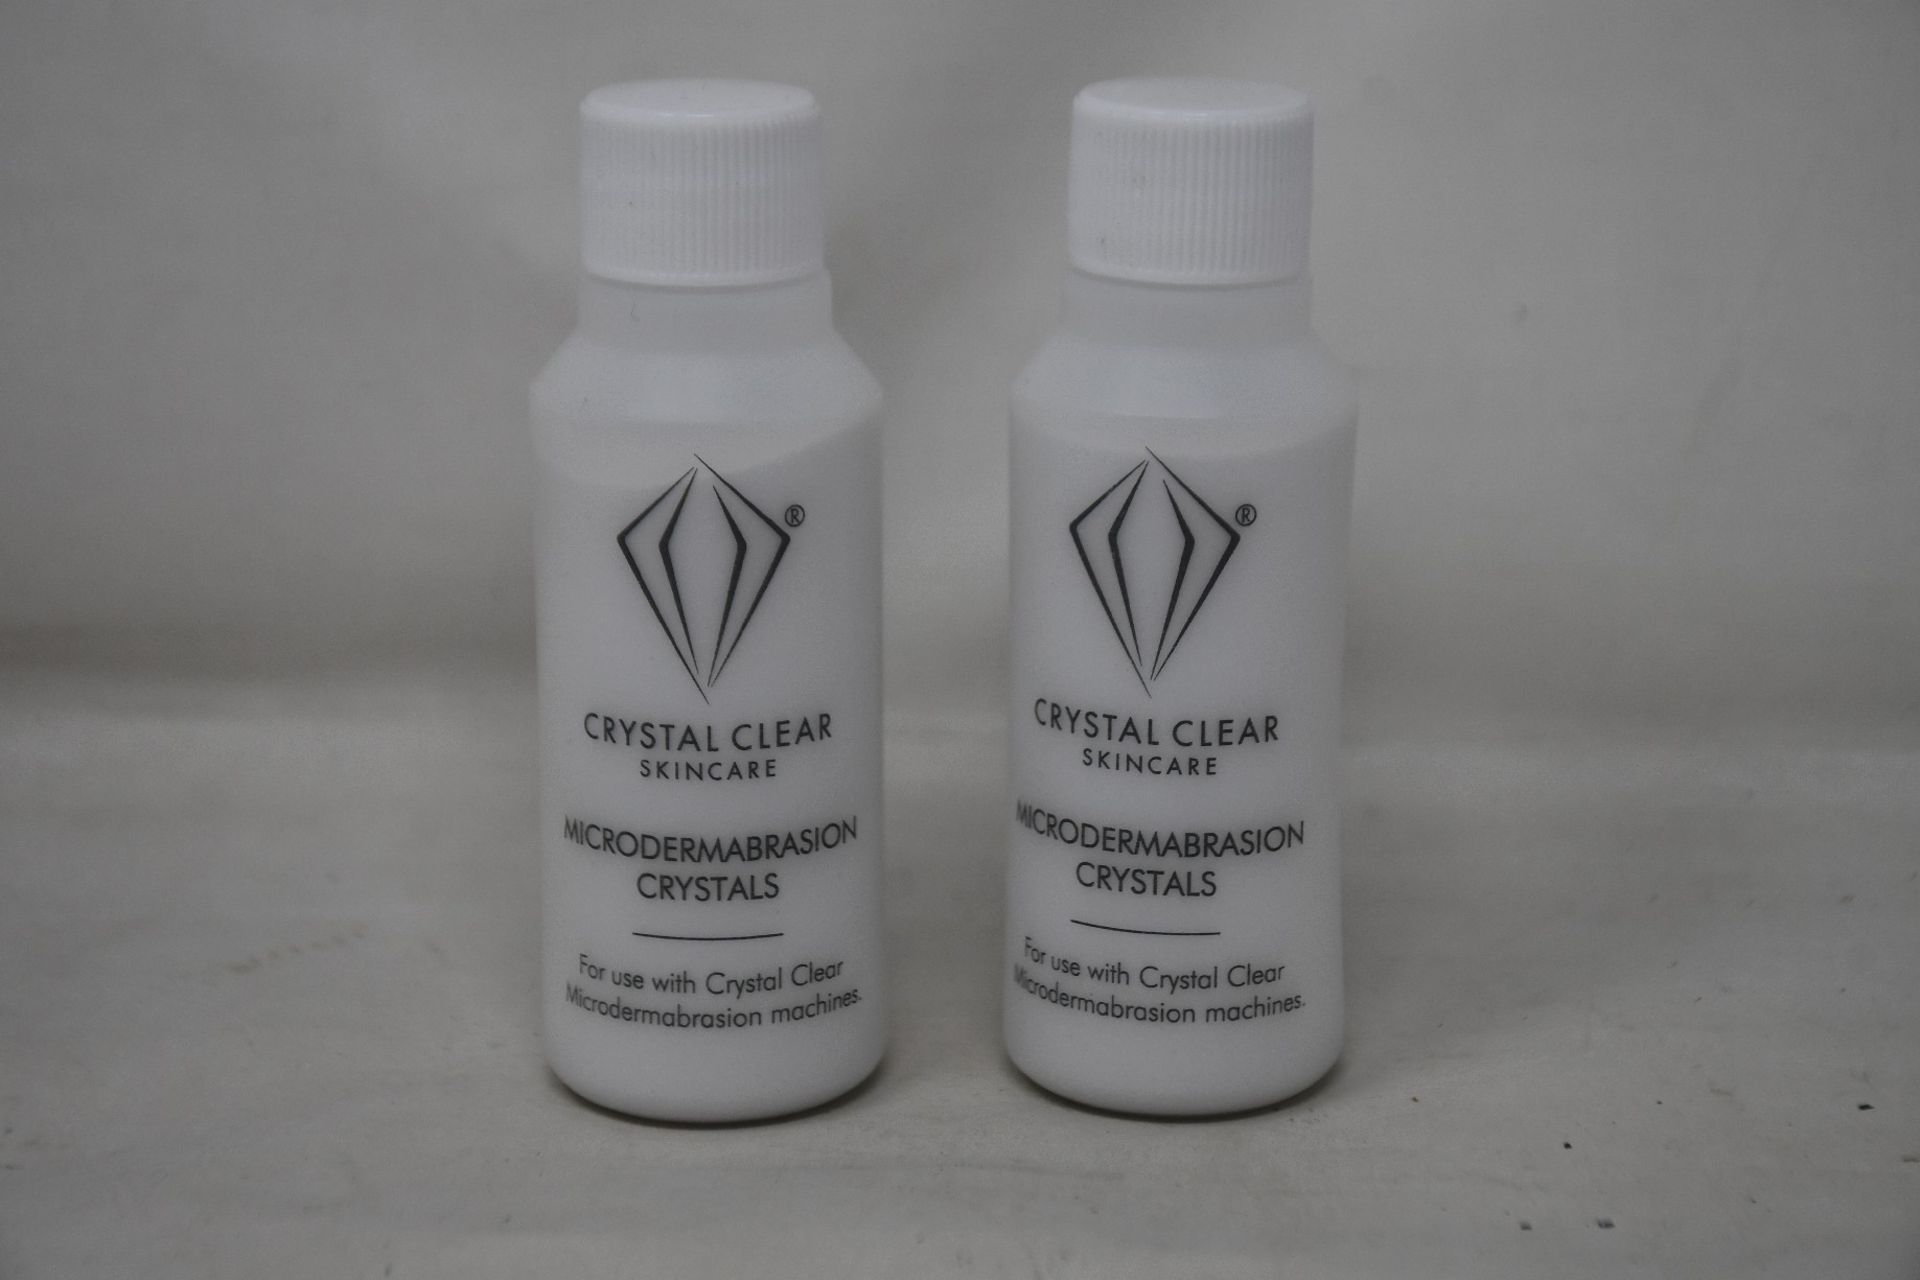 A box of as new Crystal Clear Skincare microdermabrasion crystals (52 bottles per box, 85g